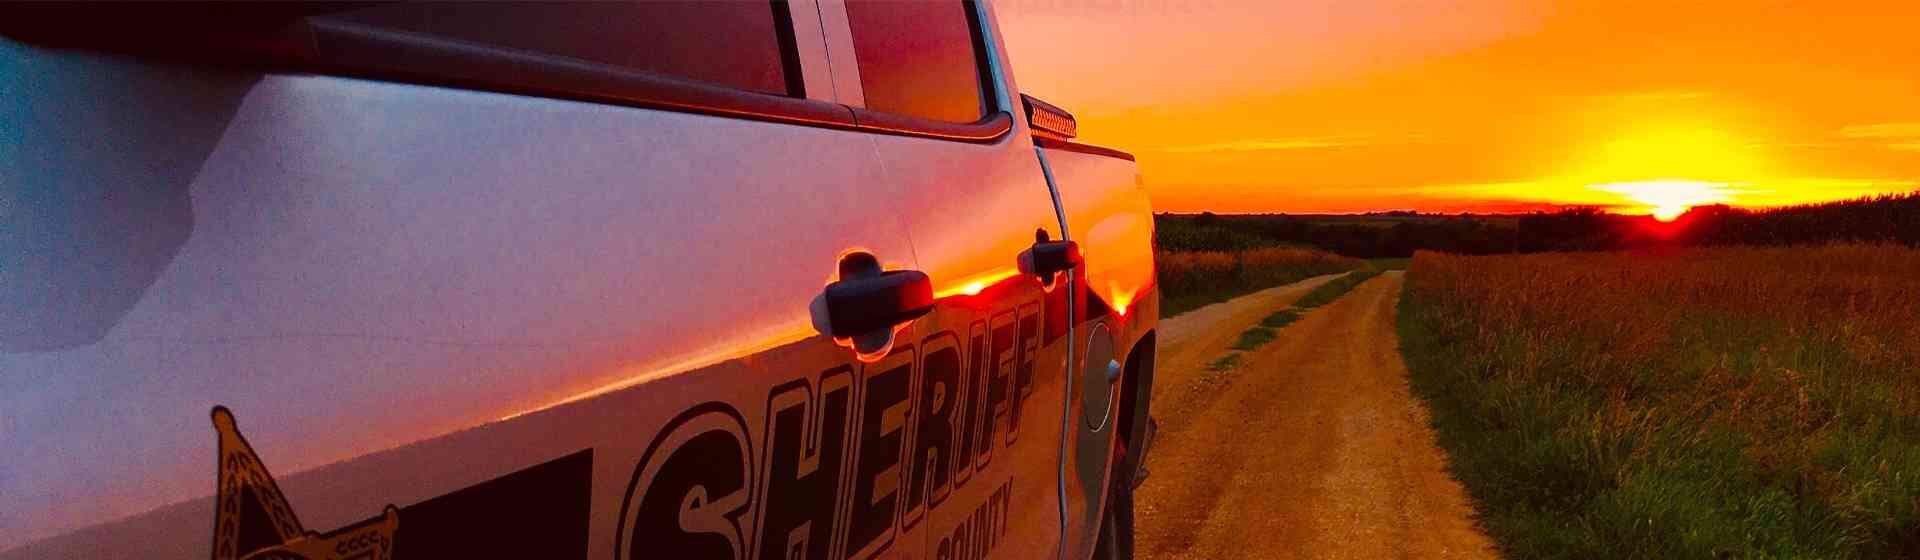 Atchison Sheriff vehicle driving away from the sun setting.